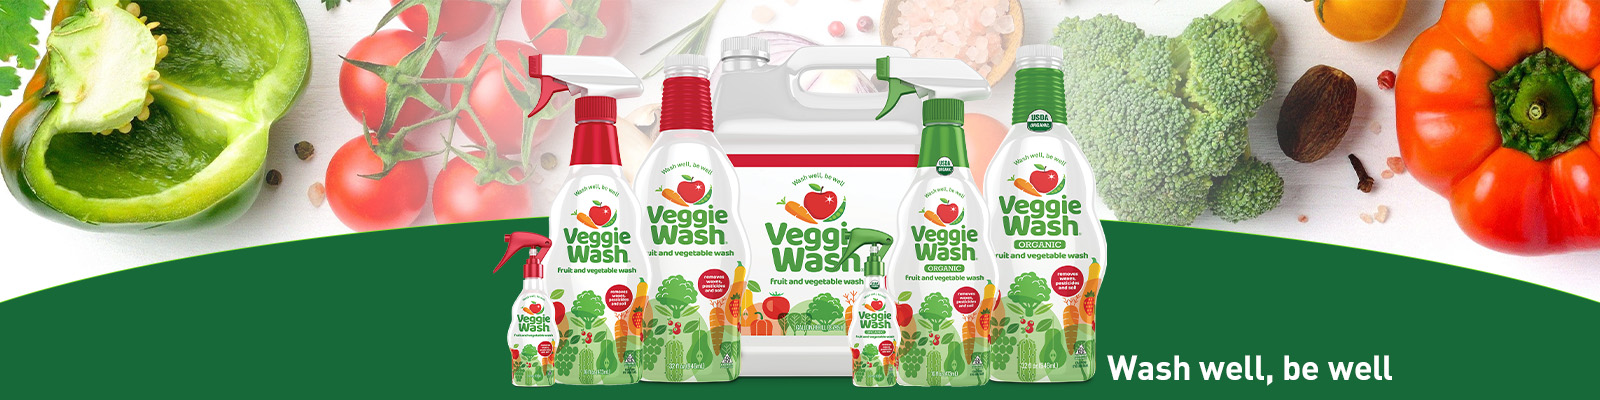 Veggie Wash Fruit and Vegetable Wash, Produce Wash and Cleaner, 16-Fluid  Ounce, Pack of 3